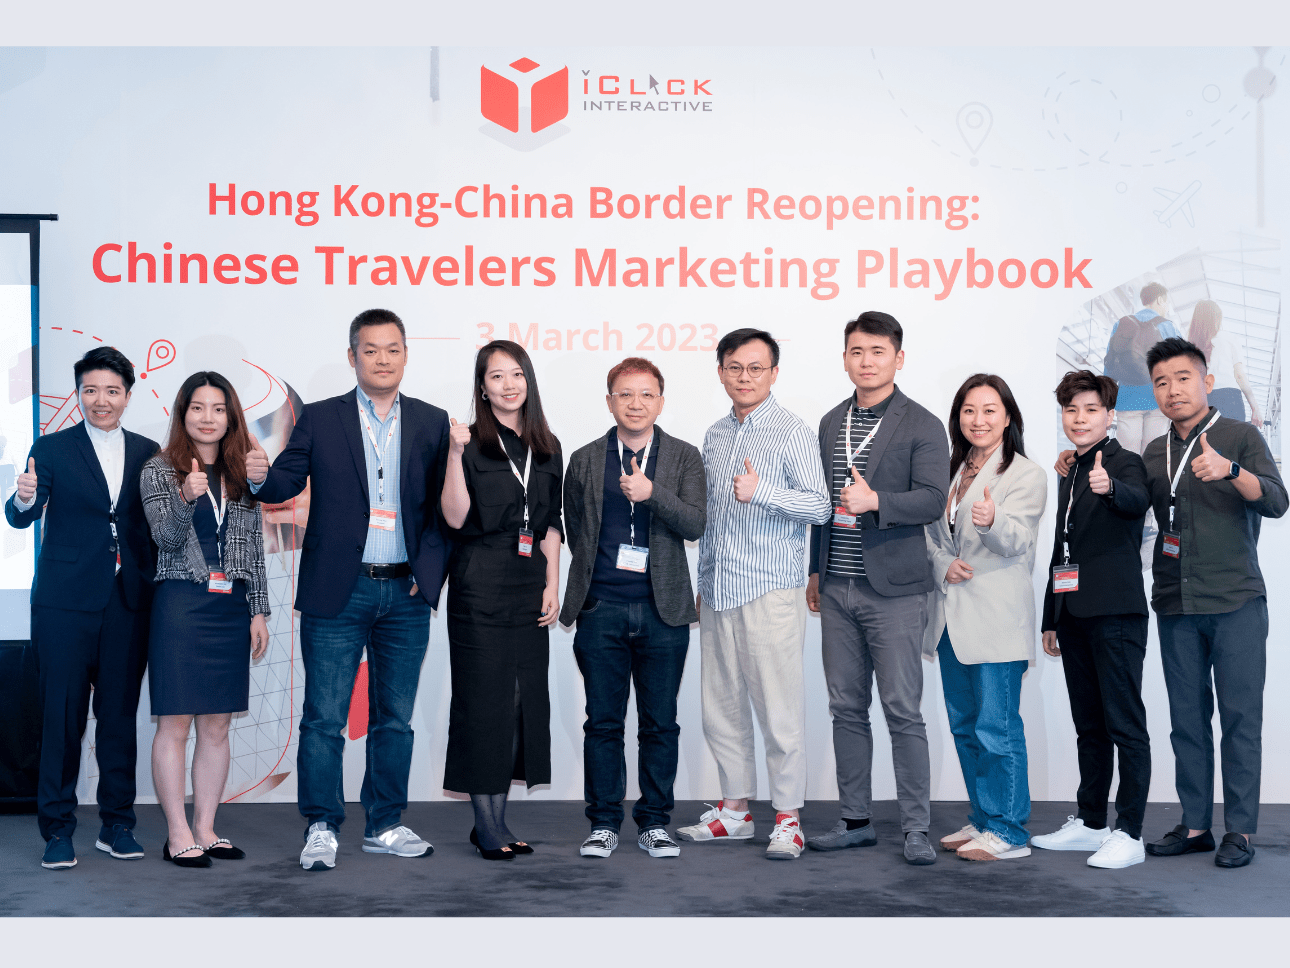 iClick’s First Physical Event in Hong Kong After the Reopening of Hong Kong-China Border was a Success!